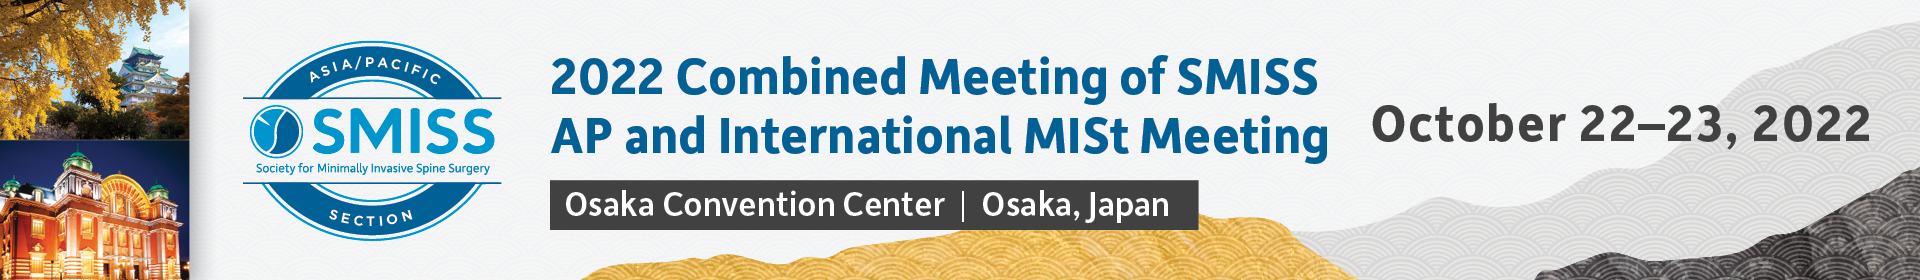 2022 Combined Meeting of SMISS AP and International MISt Meeting  Event Banner